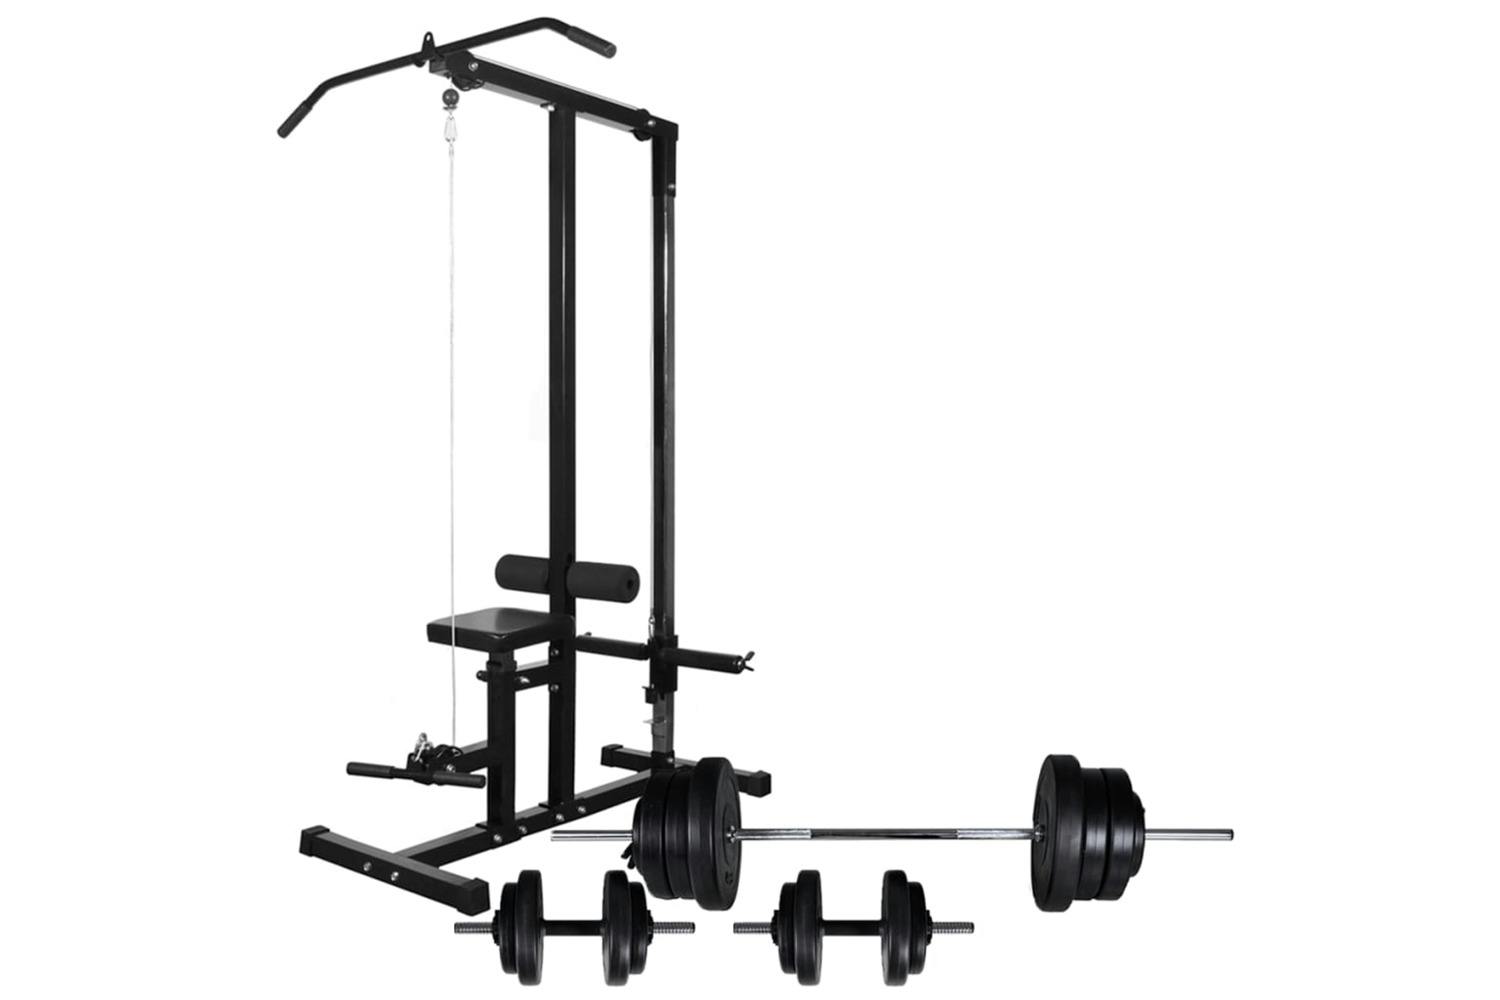 Vidaxl 275354 Power Tower With Barbell And Dumbbell Set 60.5 Kg